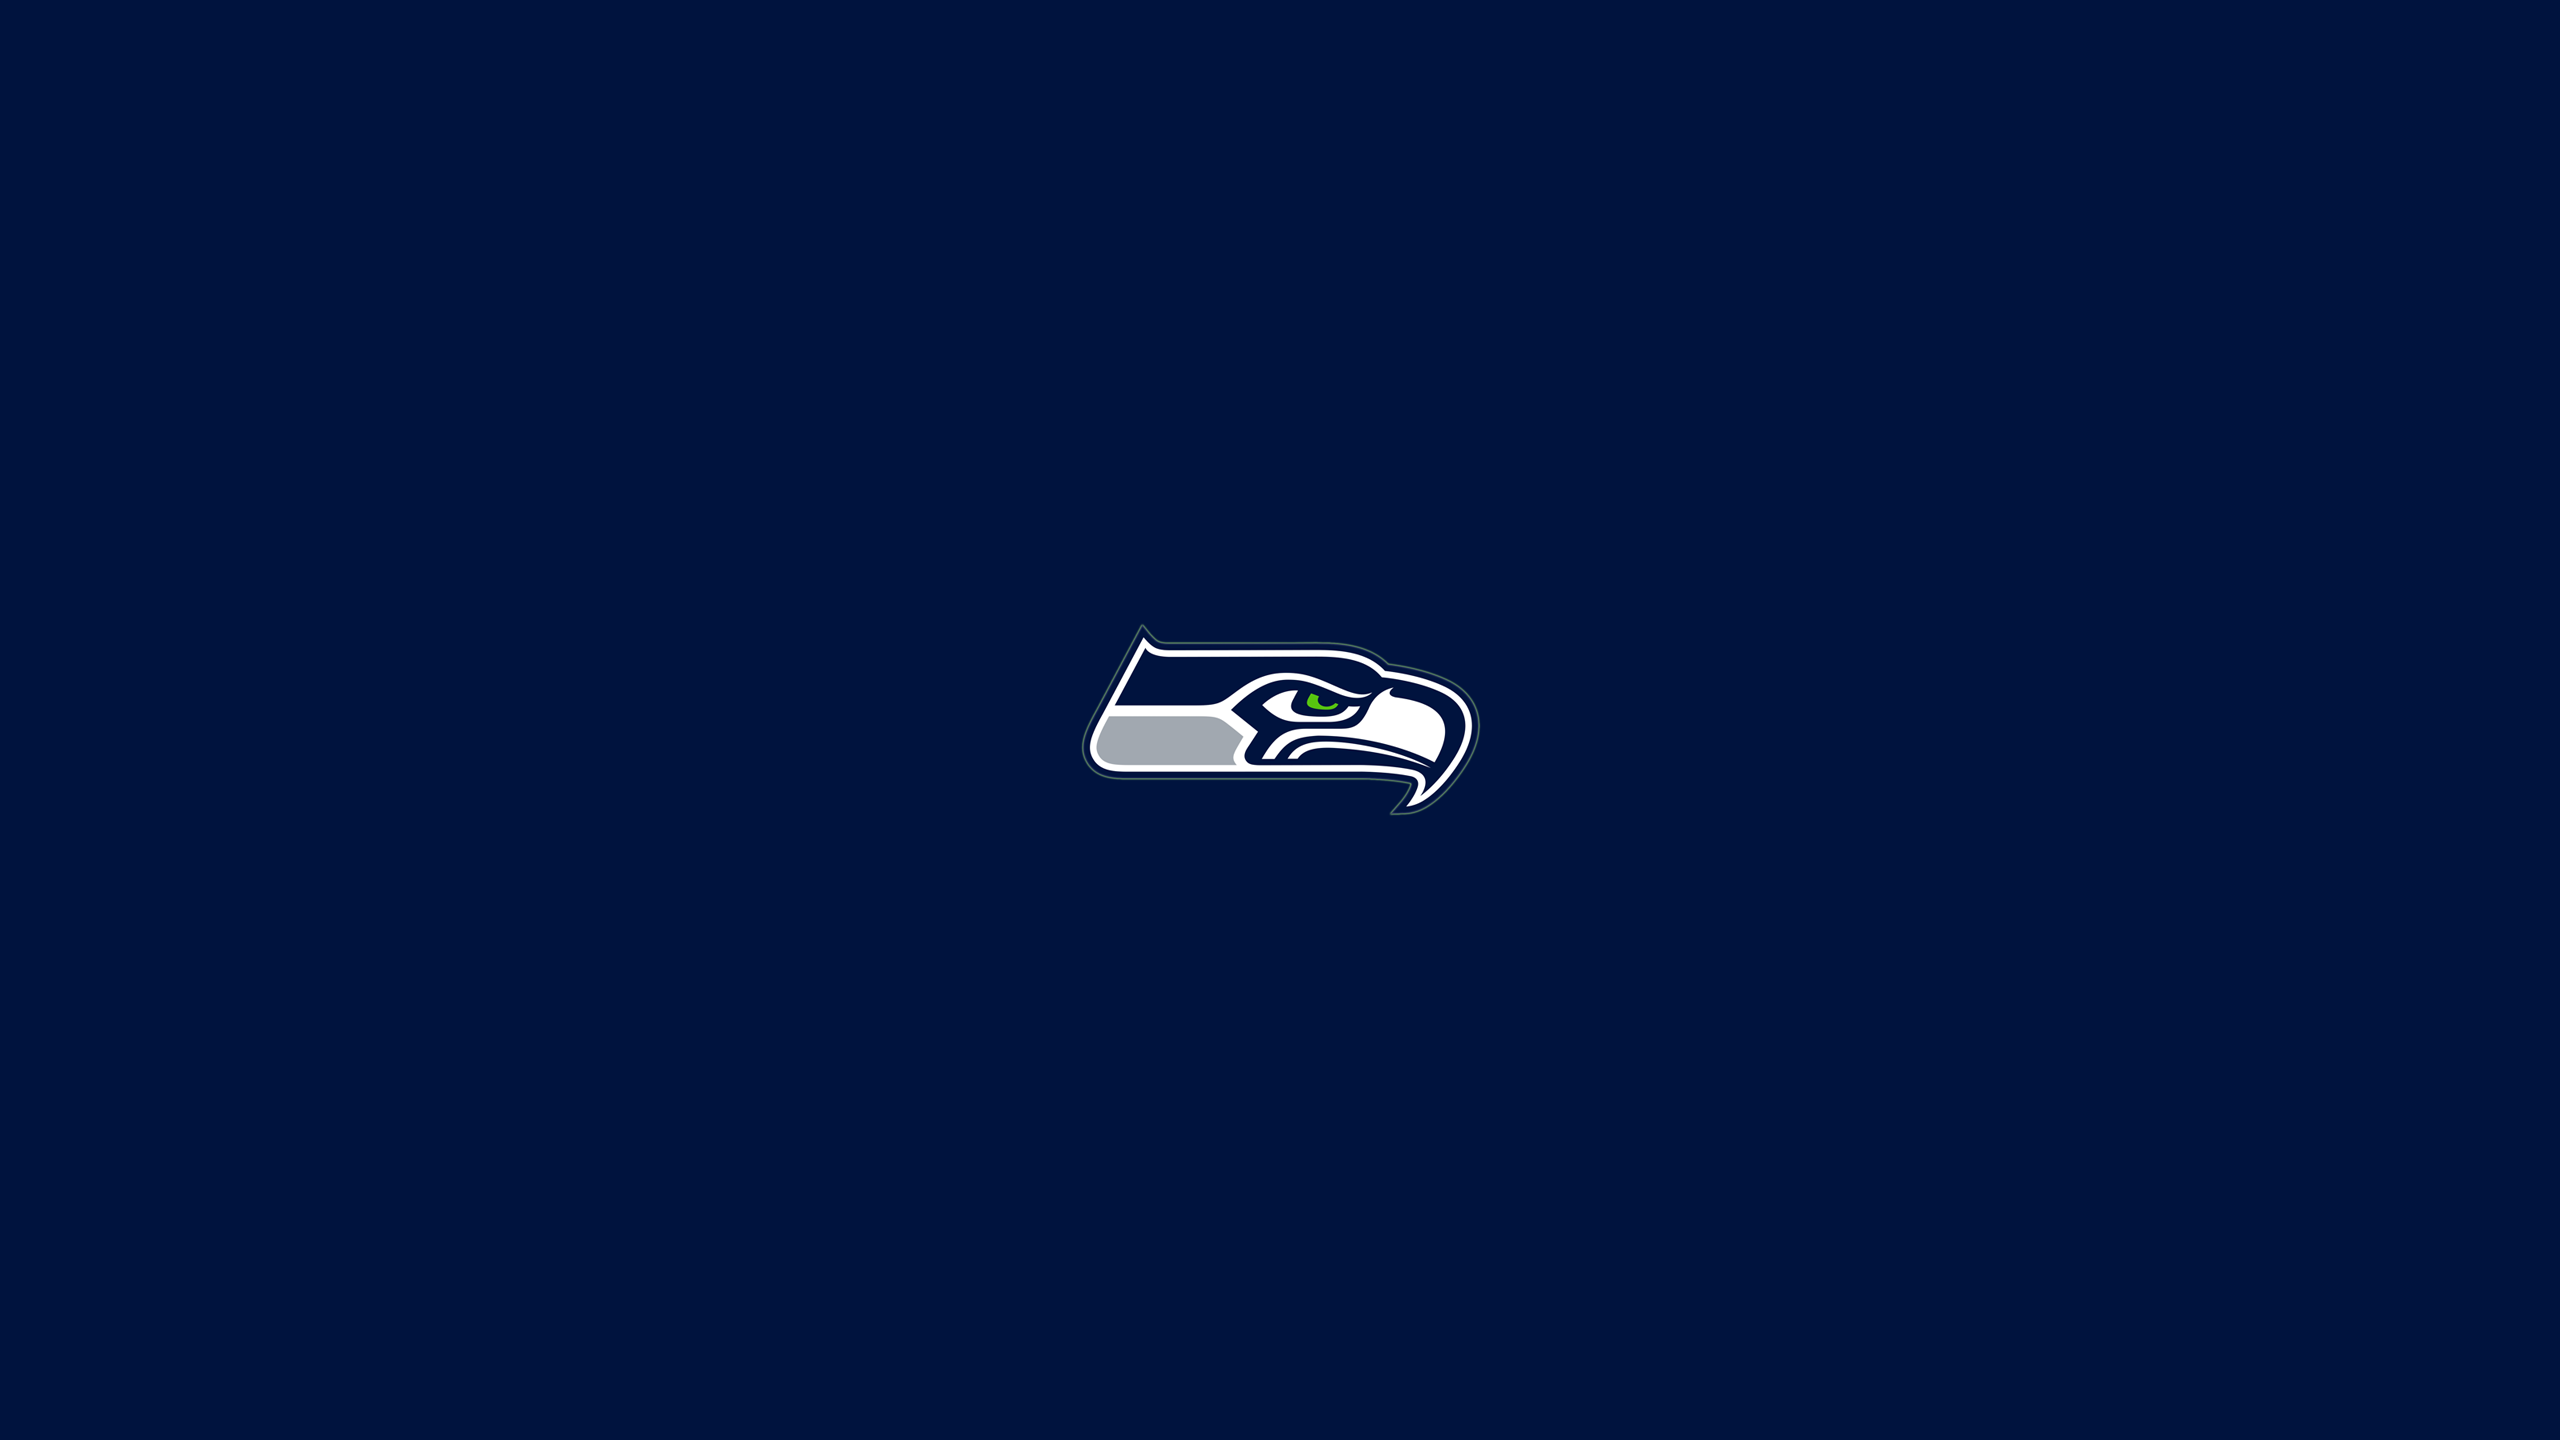 Seattle Seahawks - NFL - Square Bettor